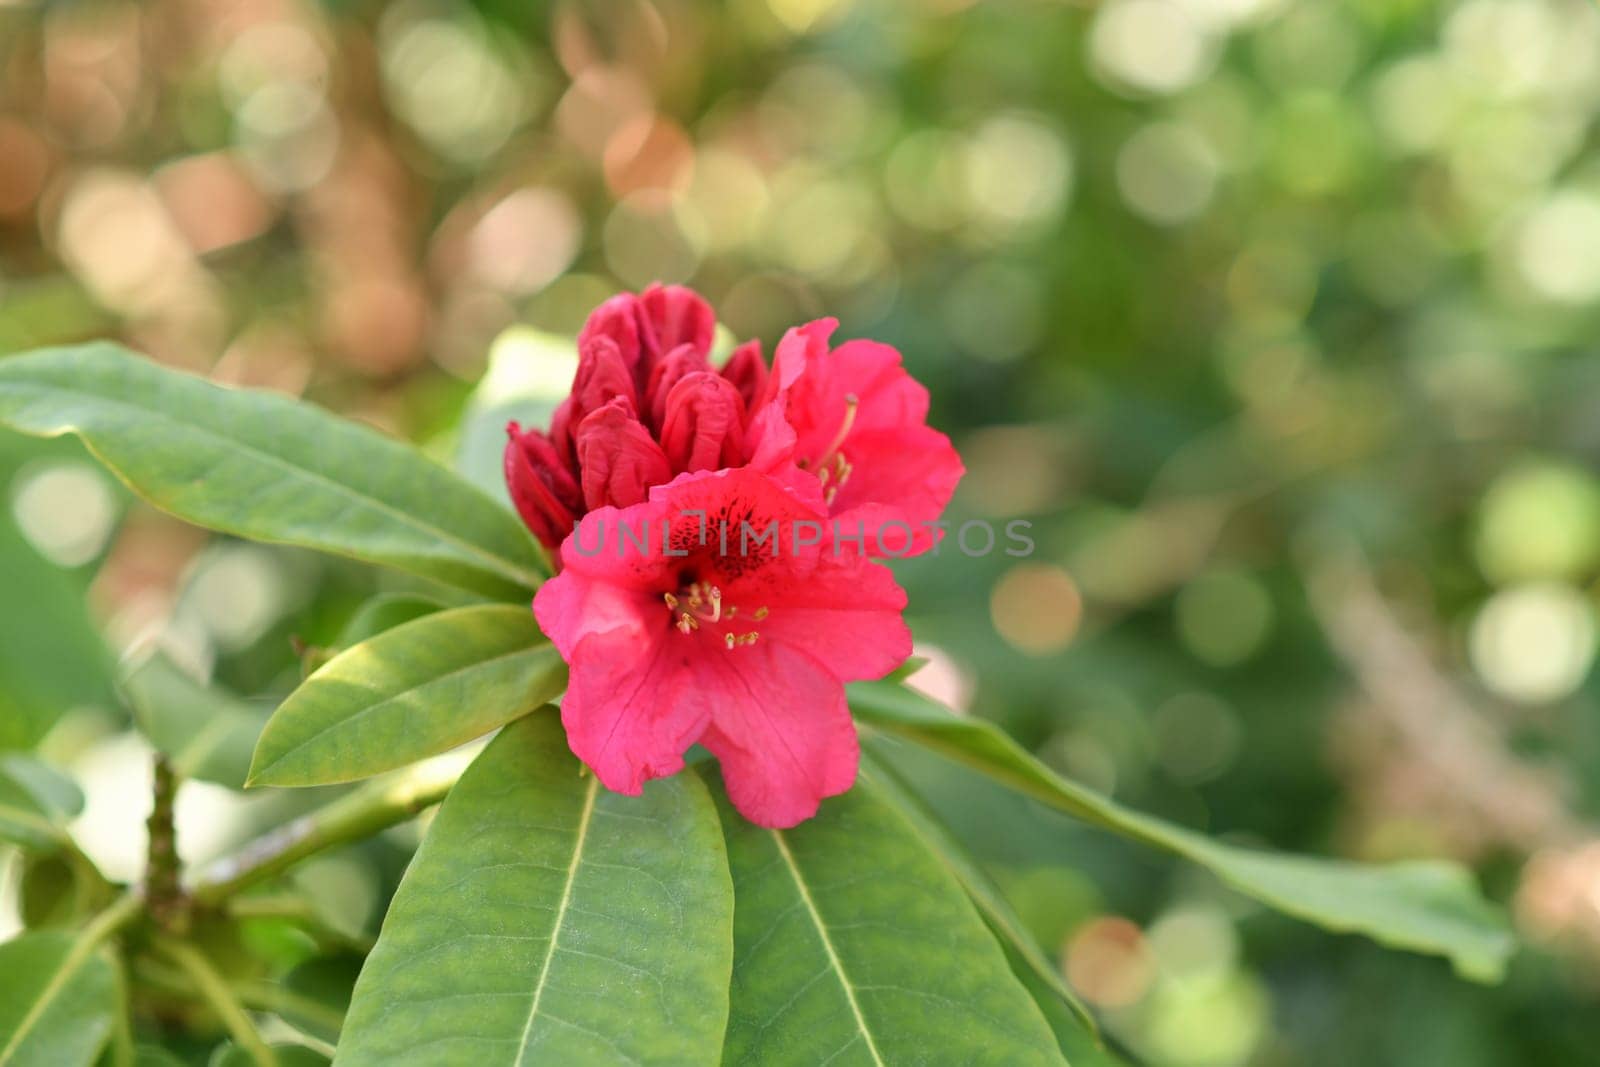 Rhododendron blooming flowers in the spring garden